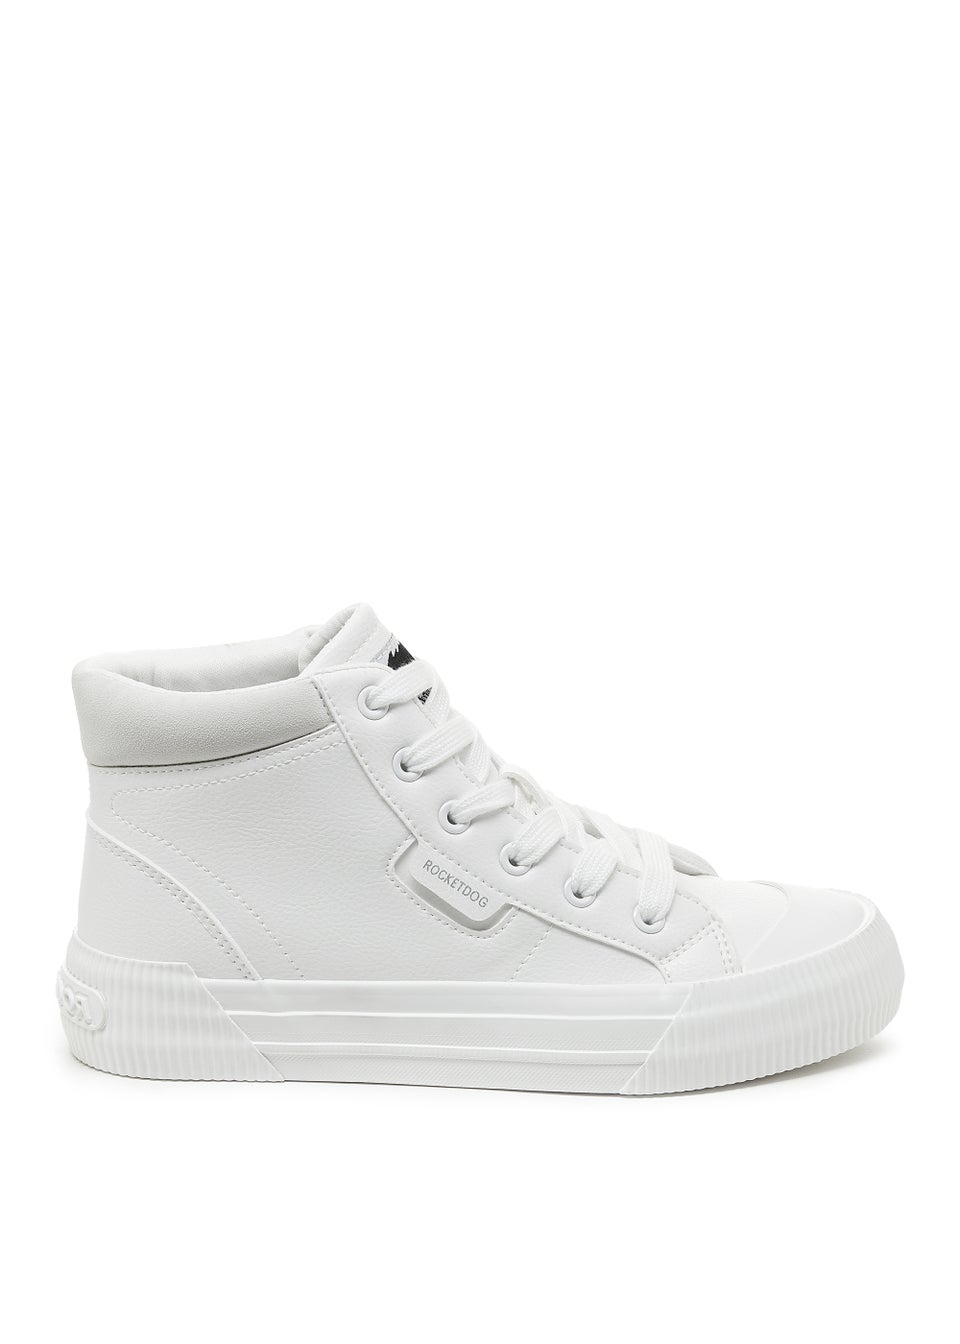 Rocket Dog Cherry White High Top Trainers